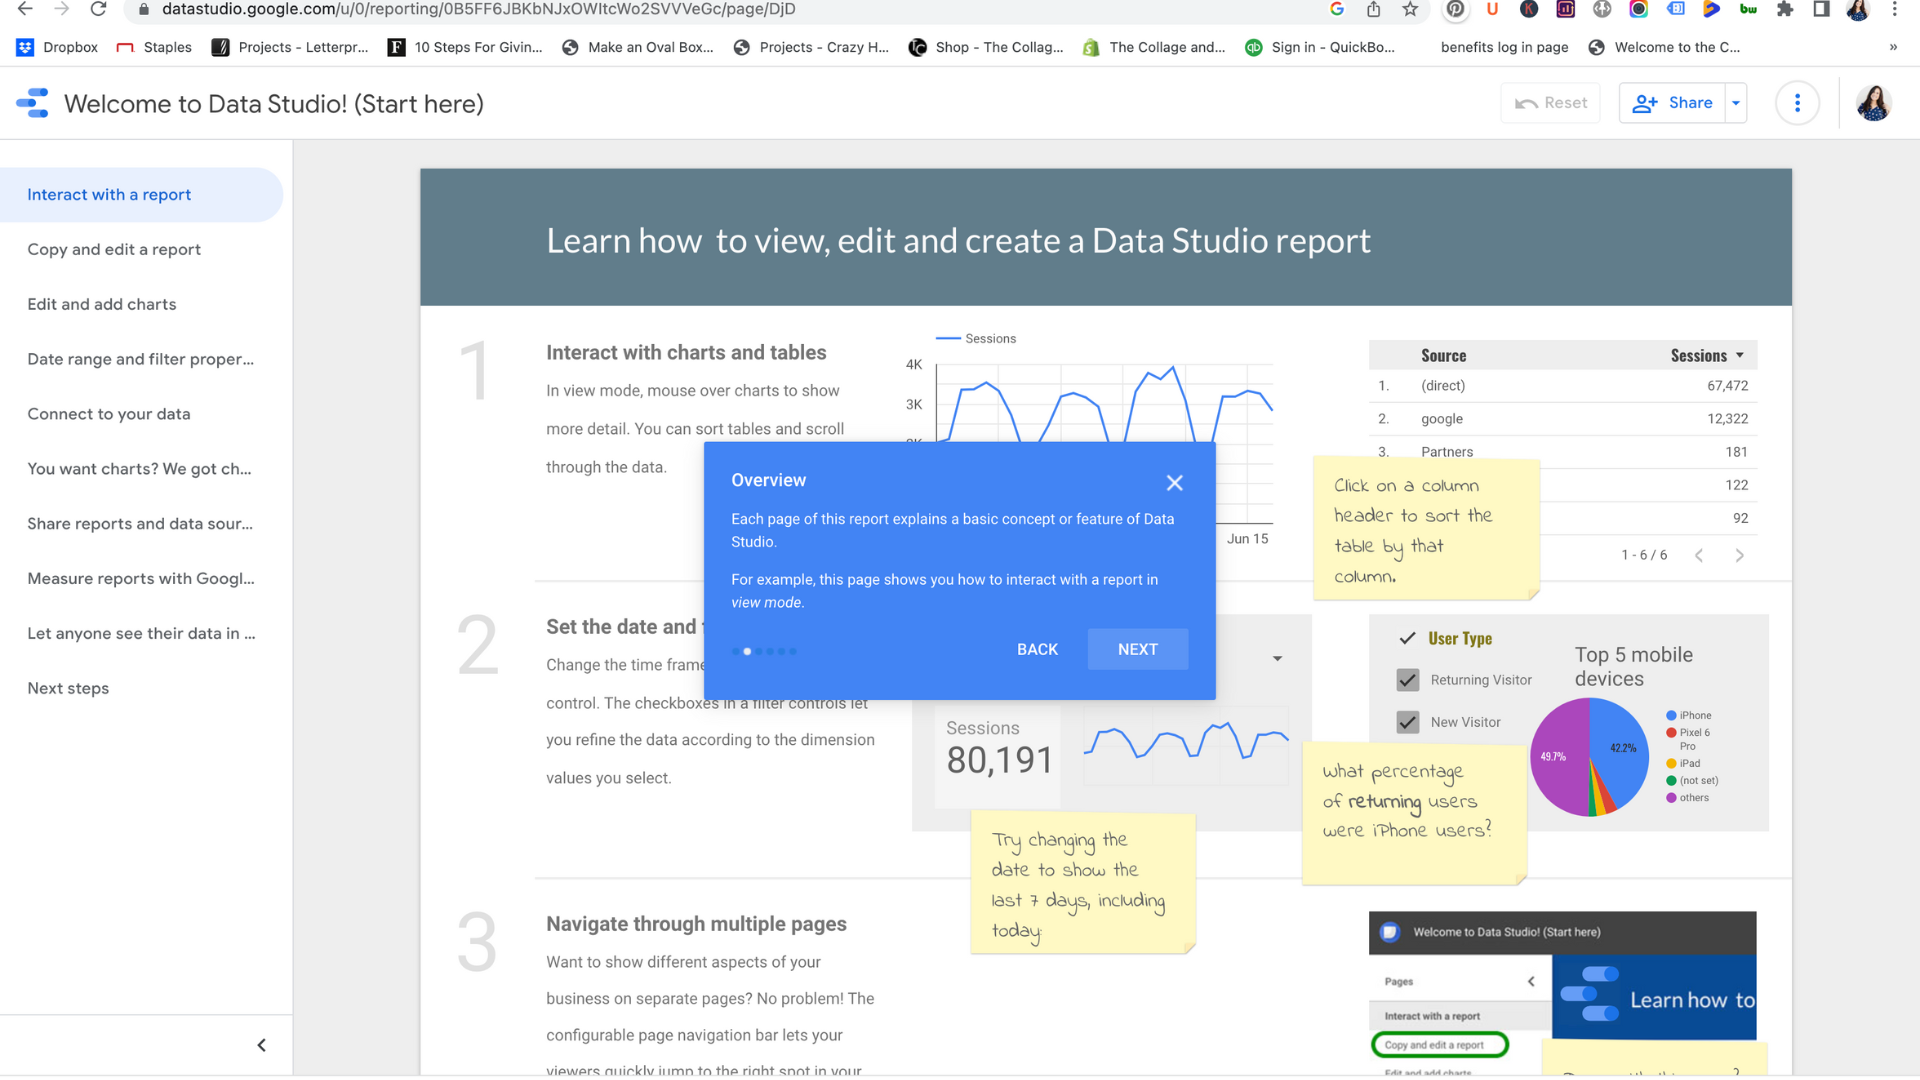 Copy one of the Google data studio templates for a fast and easy presentation of your data.